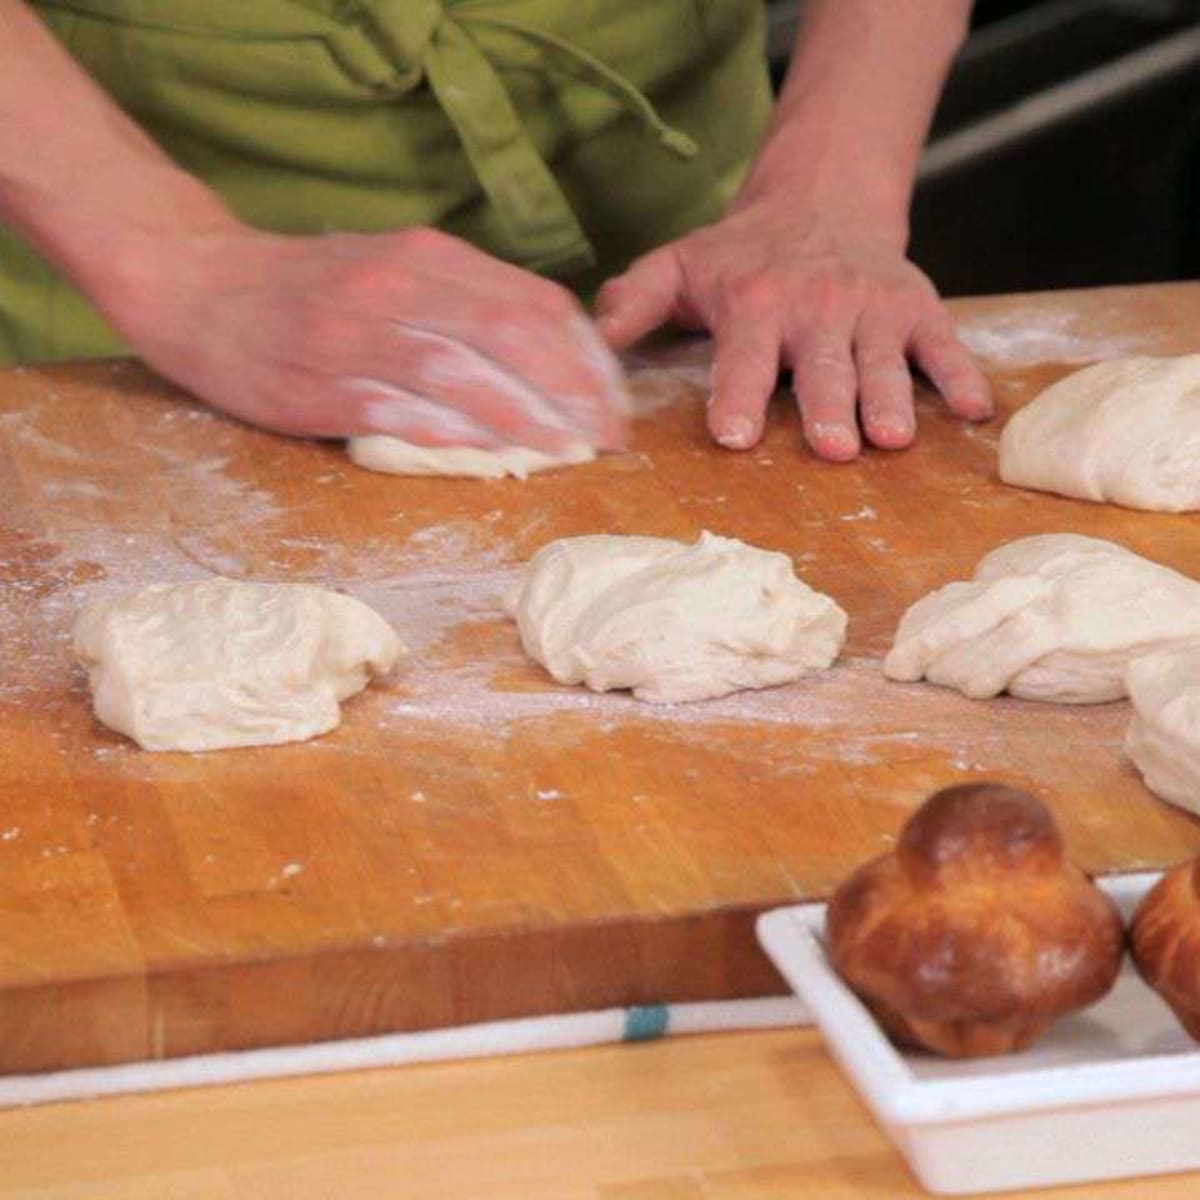 13 Bread Making Supplies You Need - Howcast